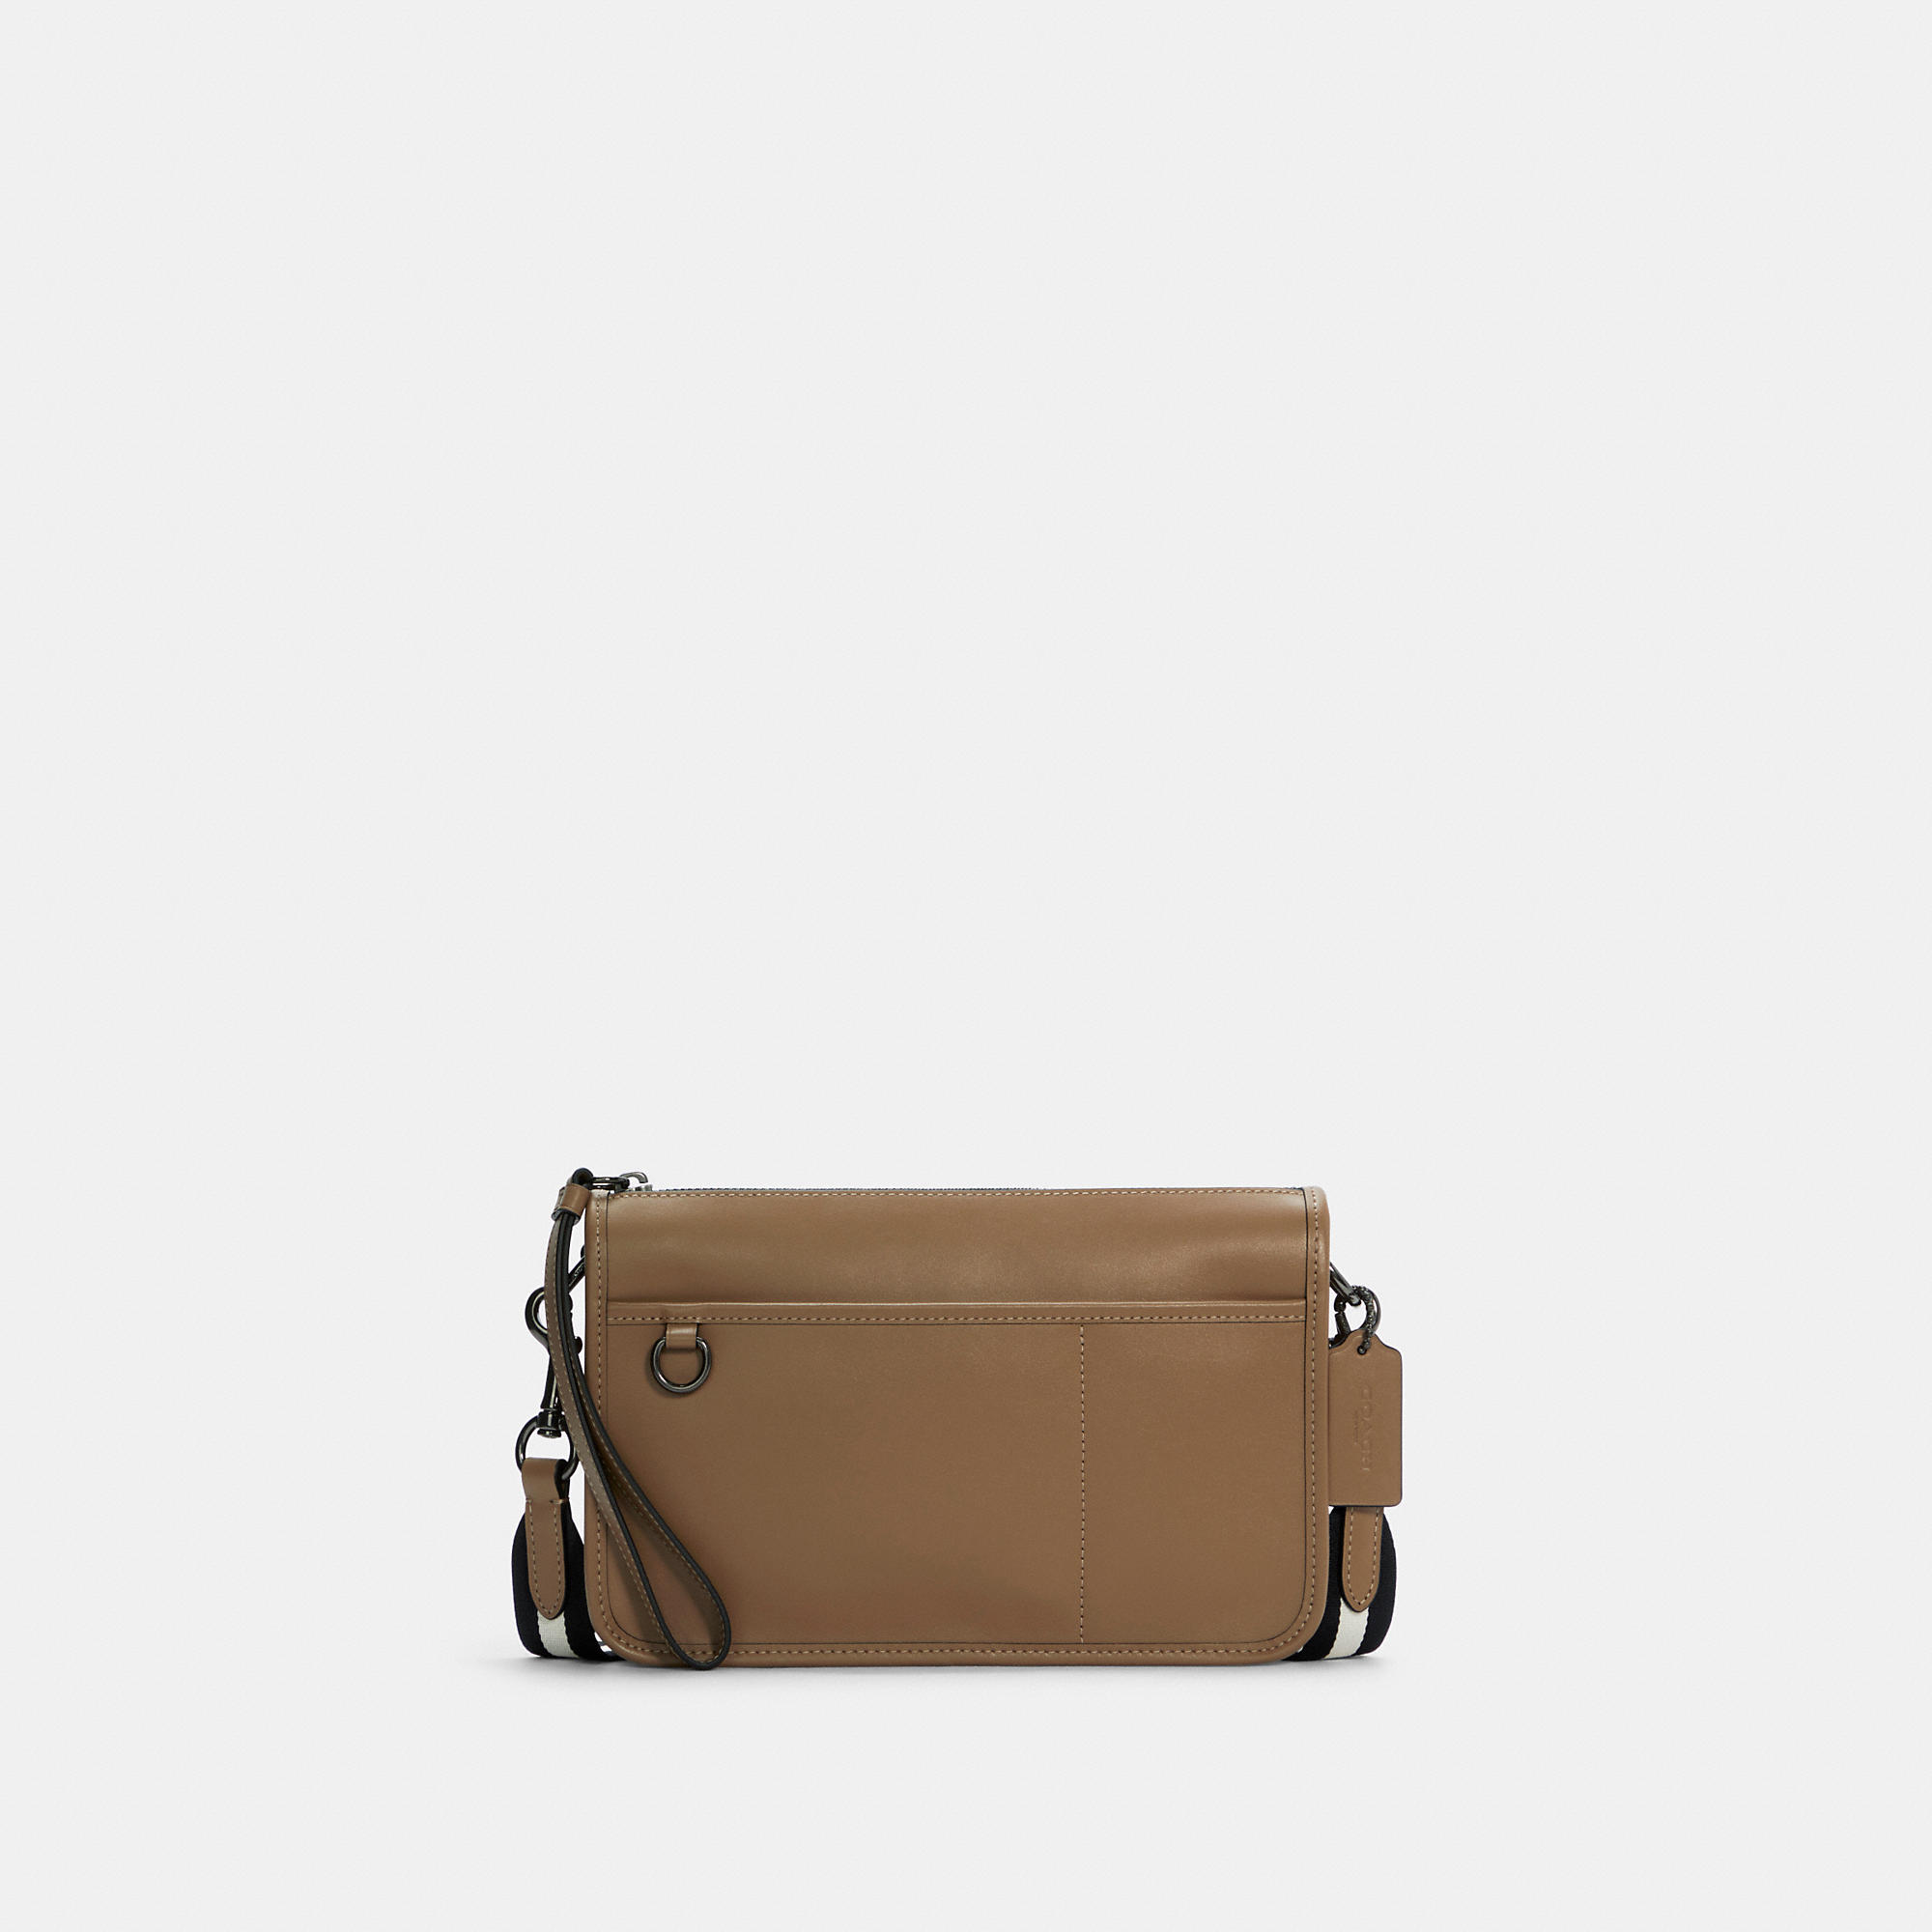 Men's COACH Crossbody Bags On Sale, Up To 70% Off | ModeSens